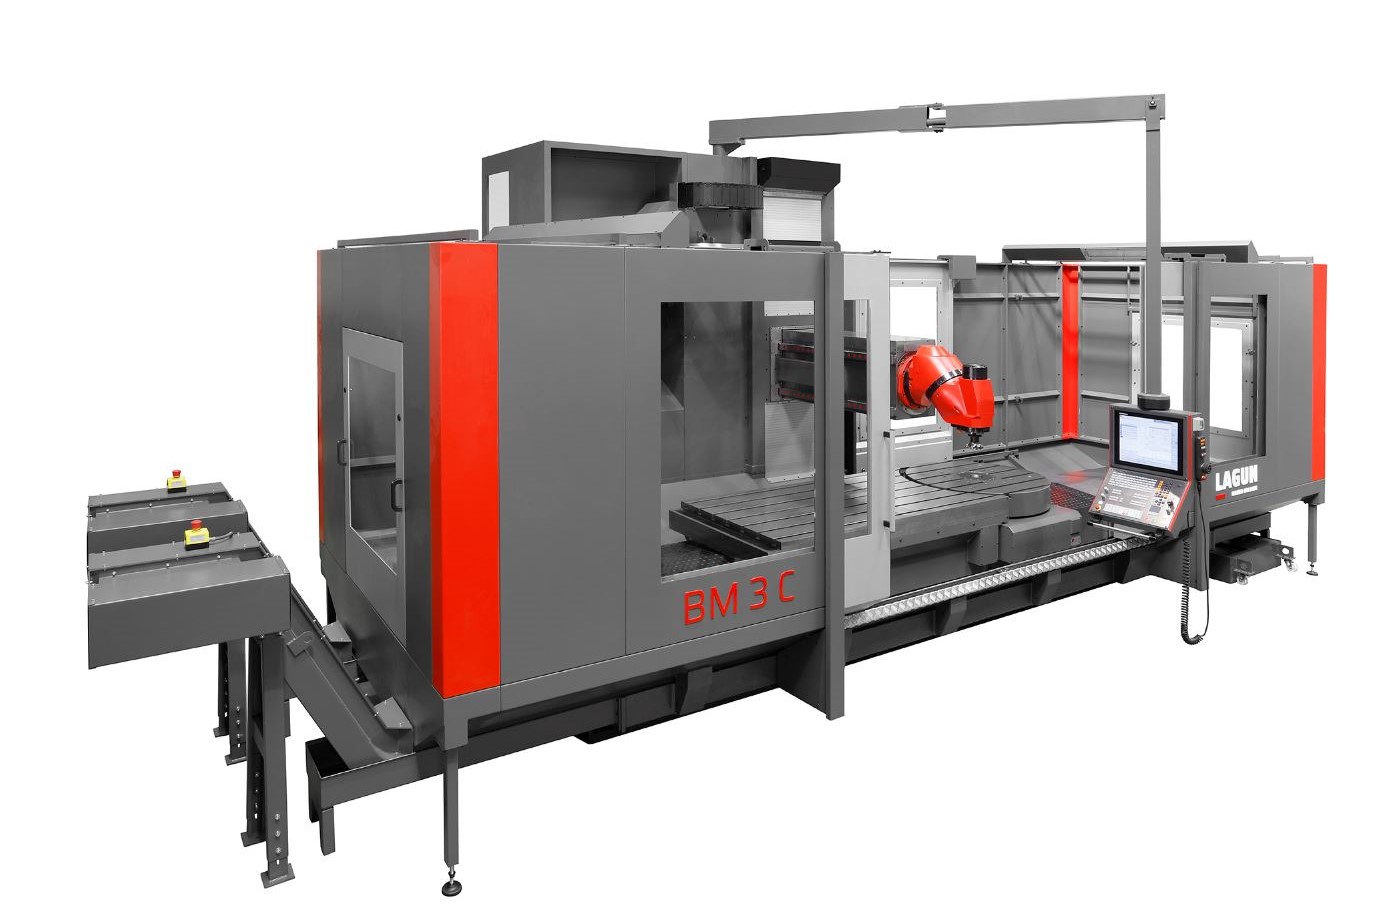 Bed type milling machines BM C - Bed type milling machine with integrated rotary table